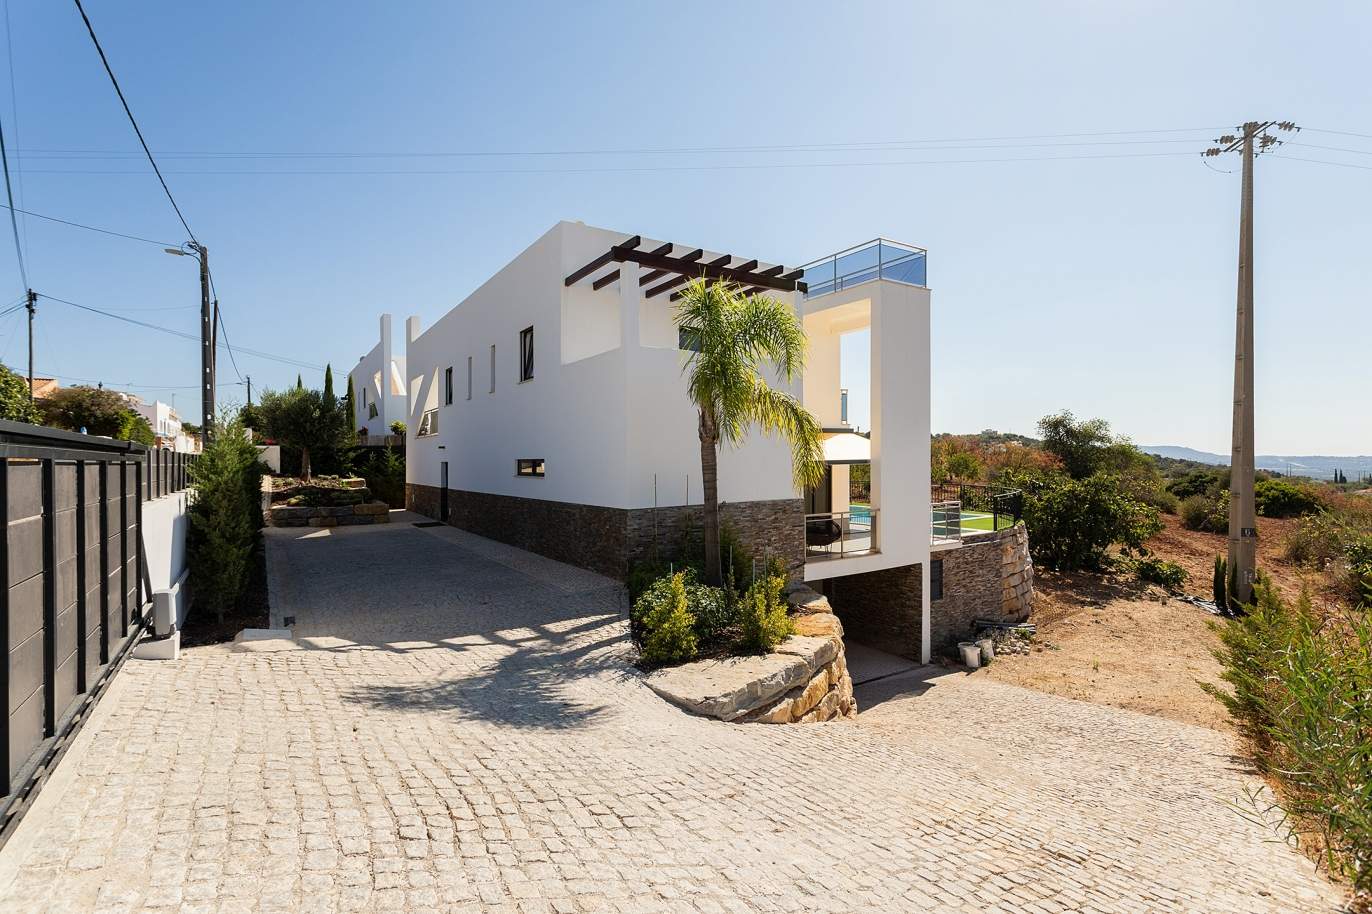 New Villa with 4 bedrooms, sea and mountain view, Loulé, Algarve_179011